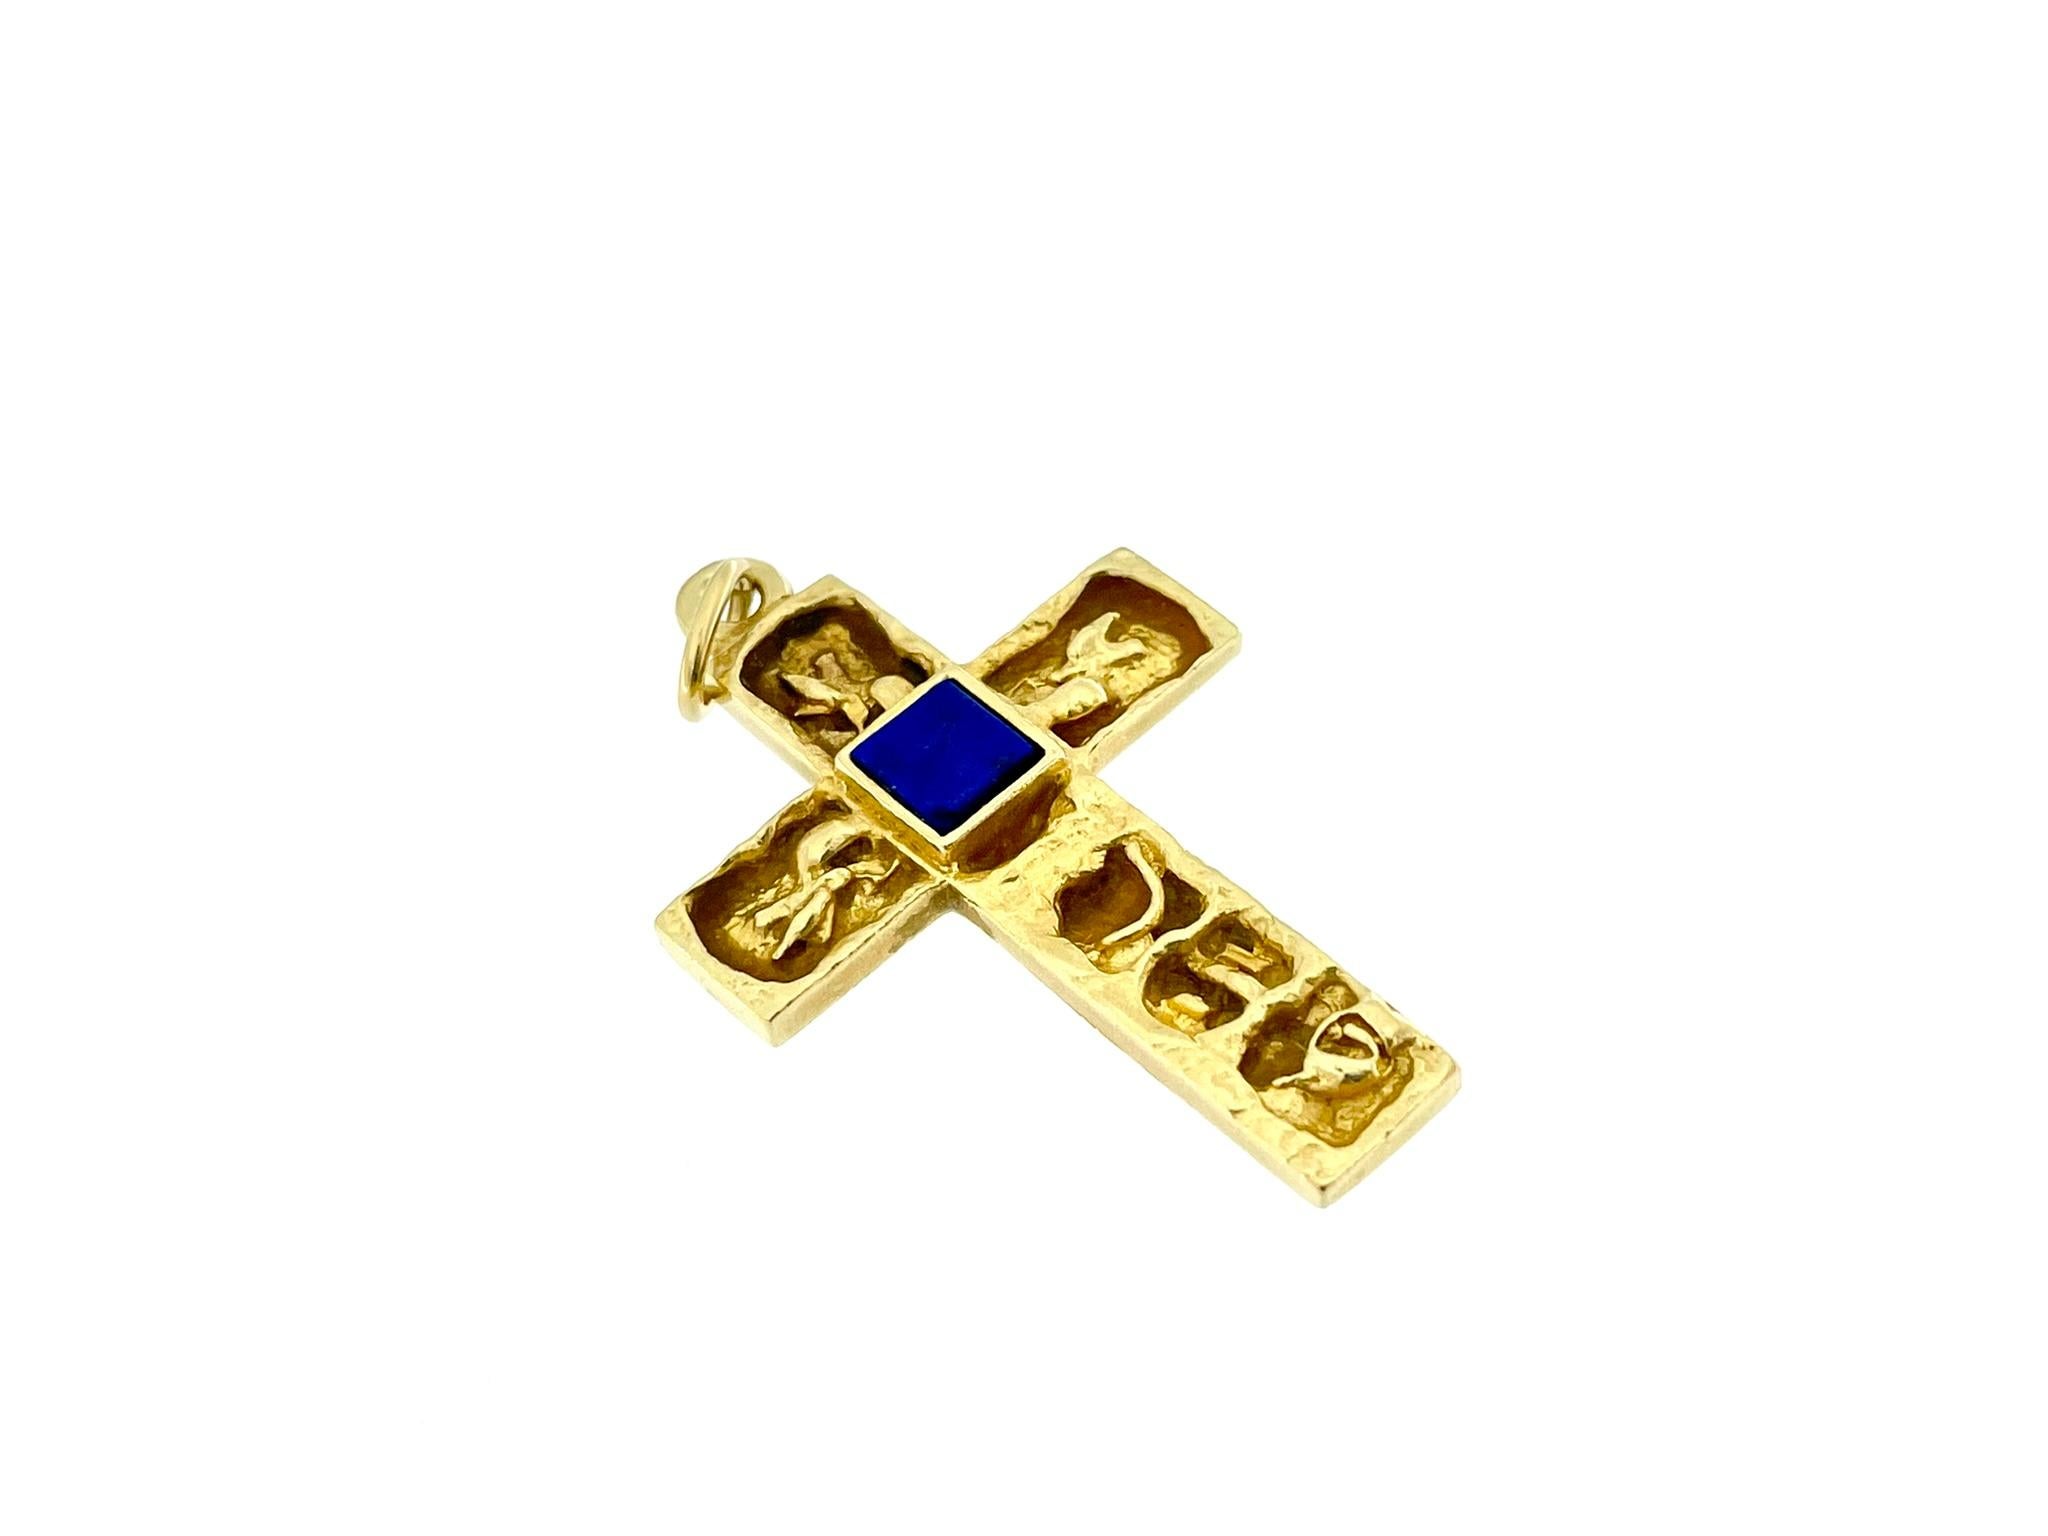 Antique Italian 18kt Yellow Gold Cross with Lapis Lazuli In Good Condition For Sale In Esch-Sur-Alzette, LU